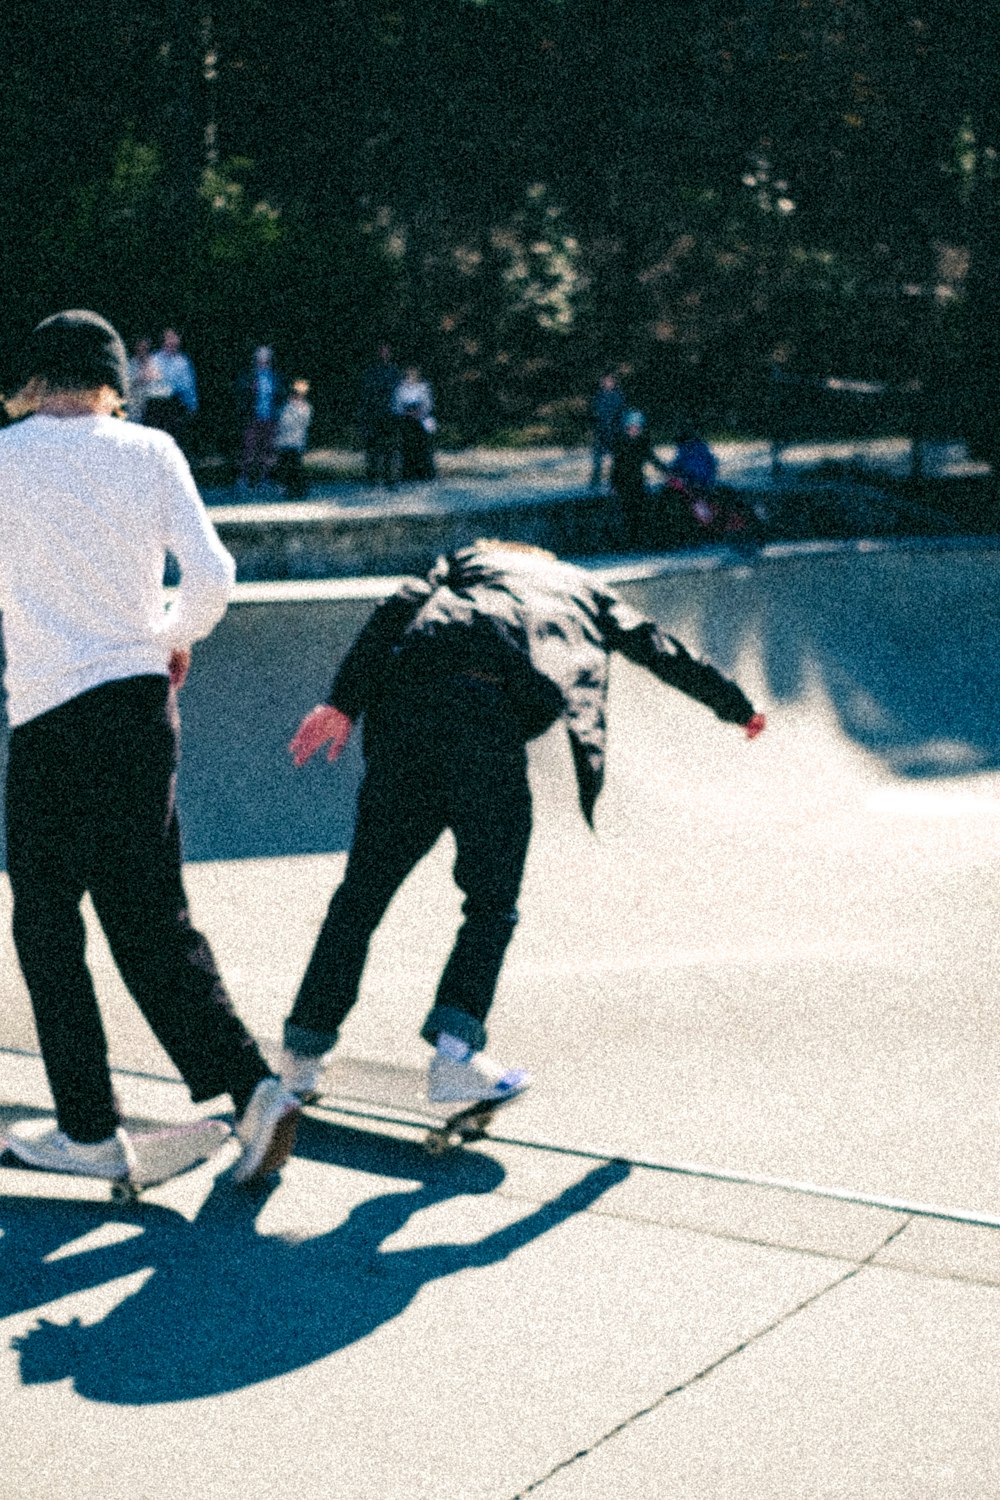 a couple of people riding skateboards at a skate park